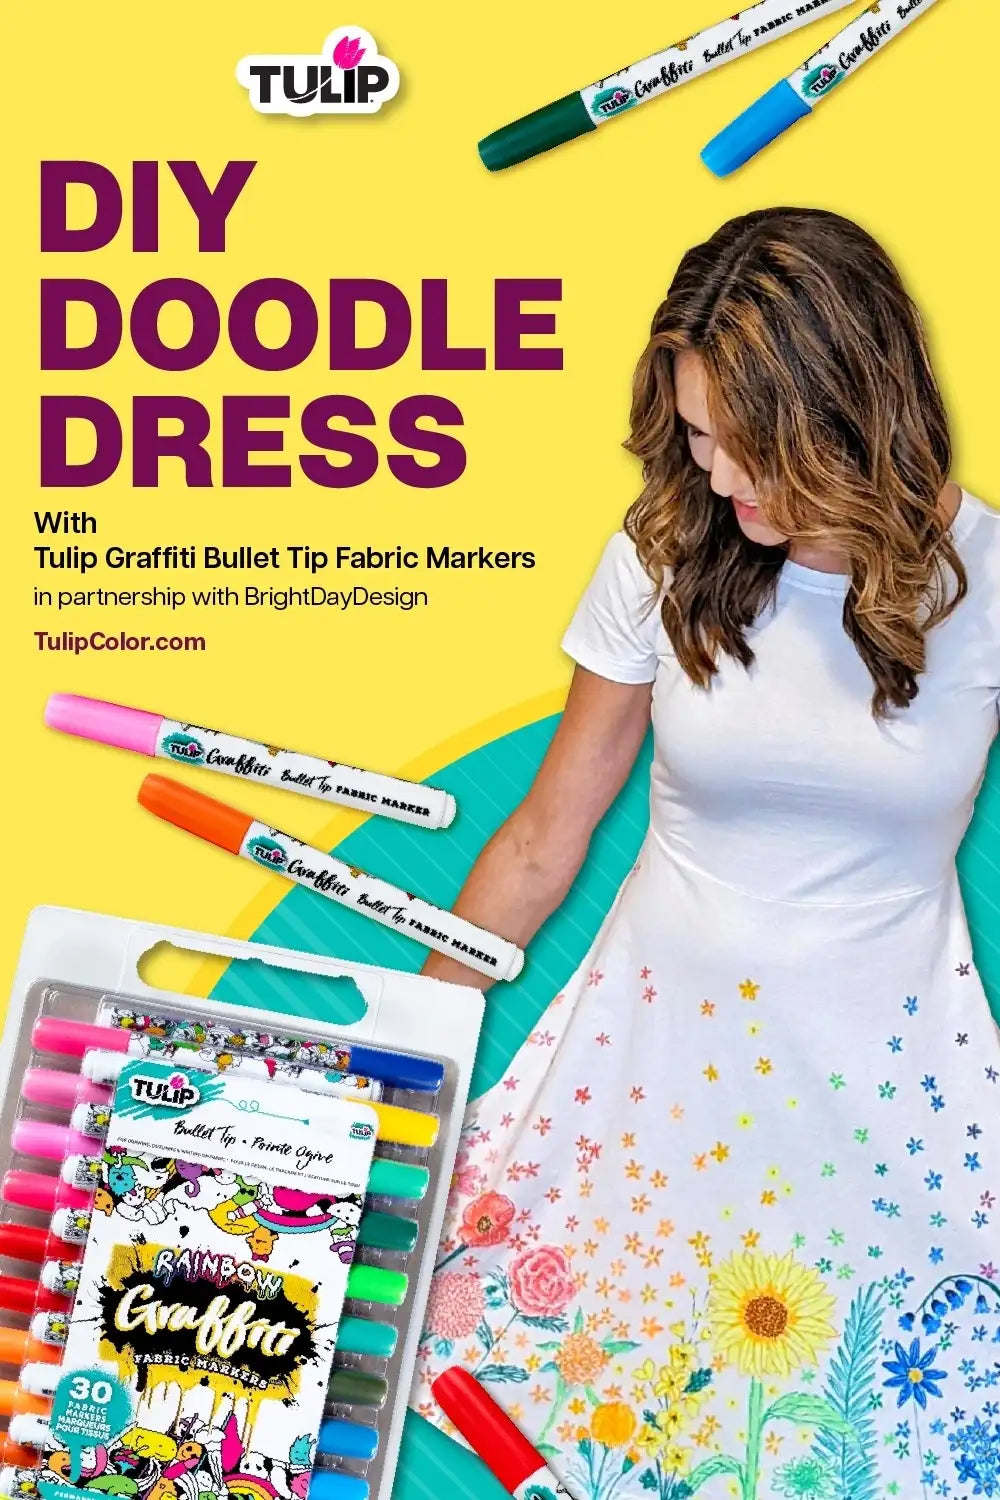 How To Design A DIY Dress With Fabric Marker Doodles